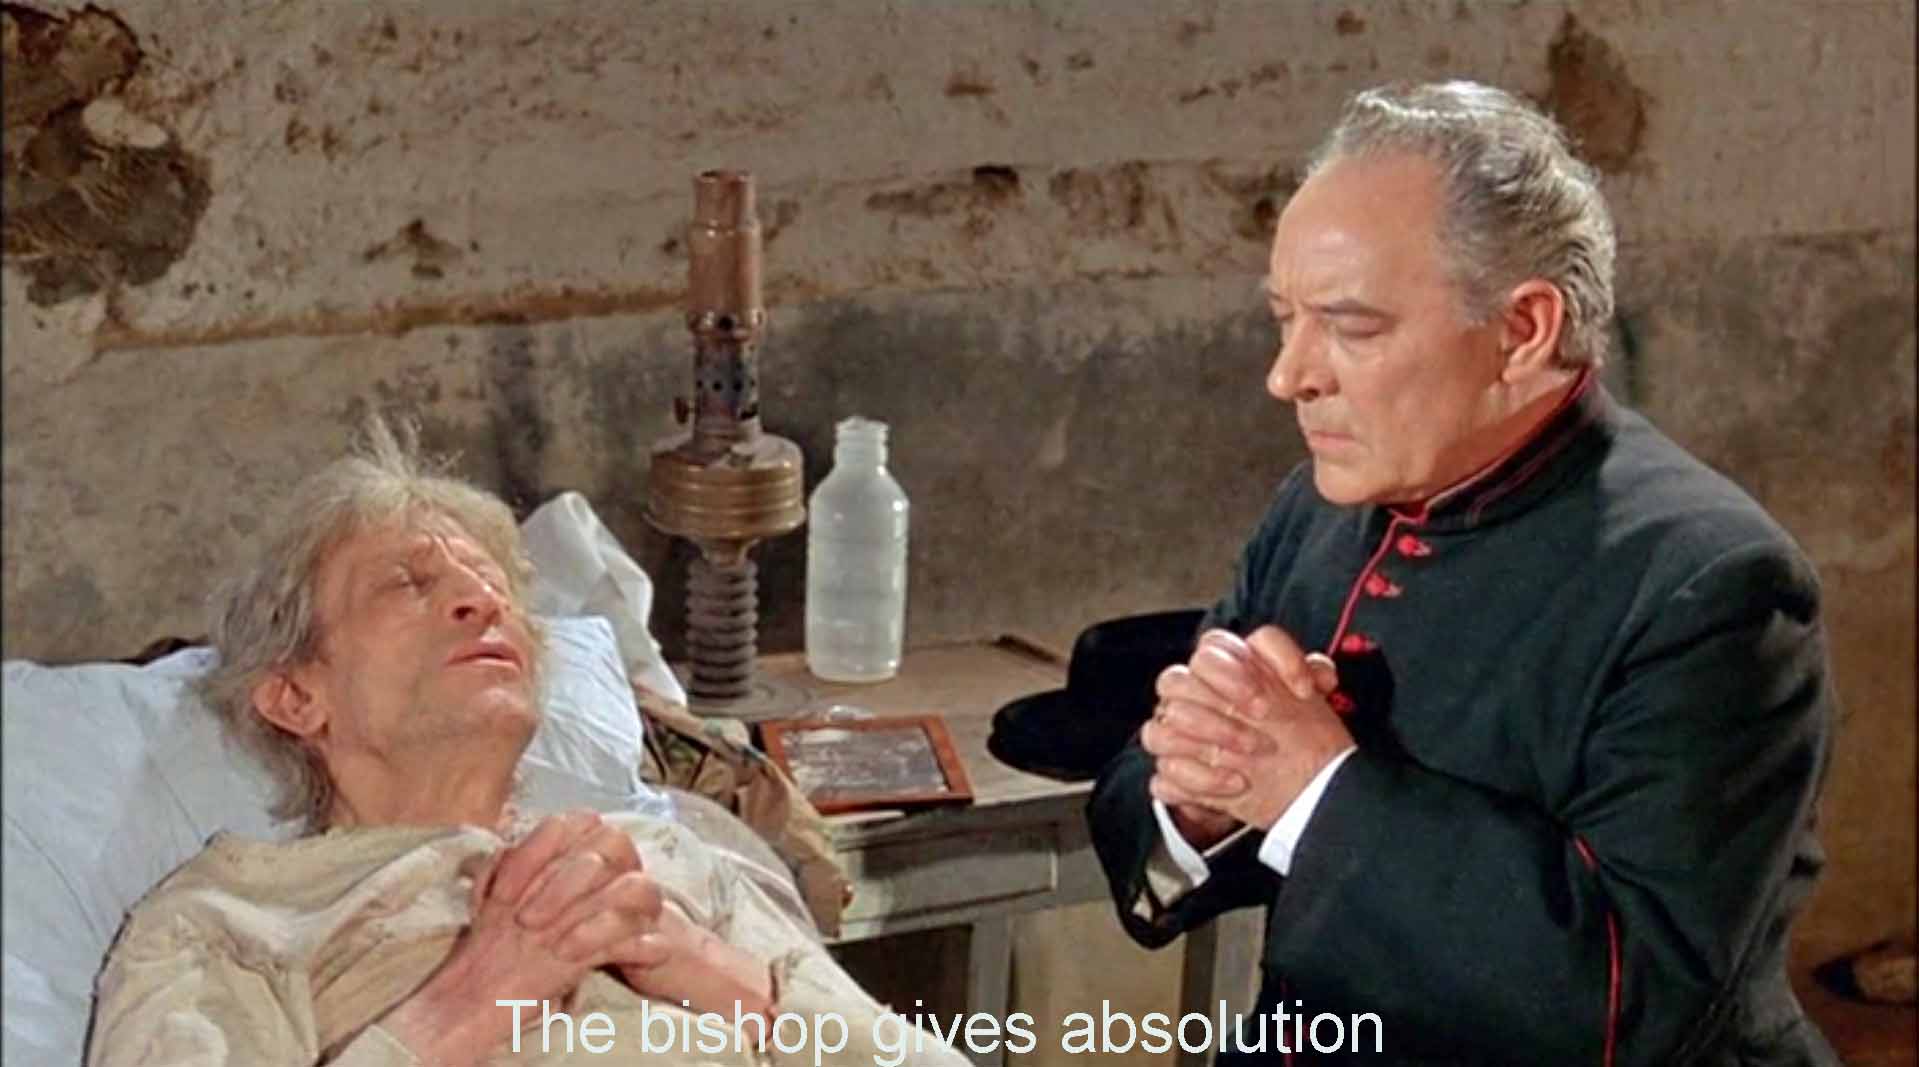 The bishop gives absolution